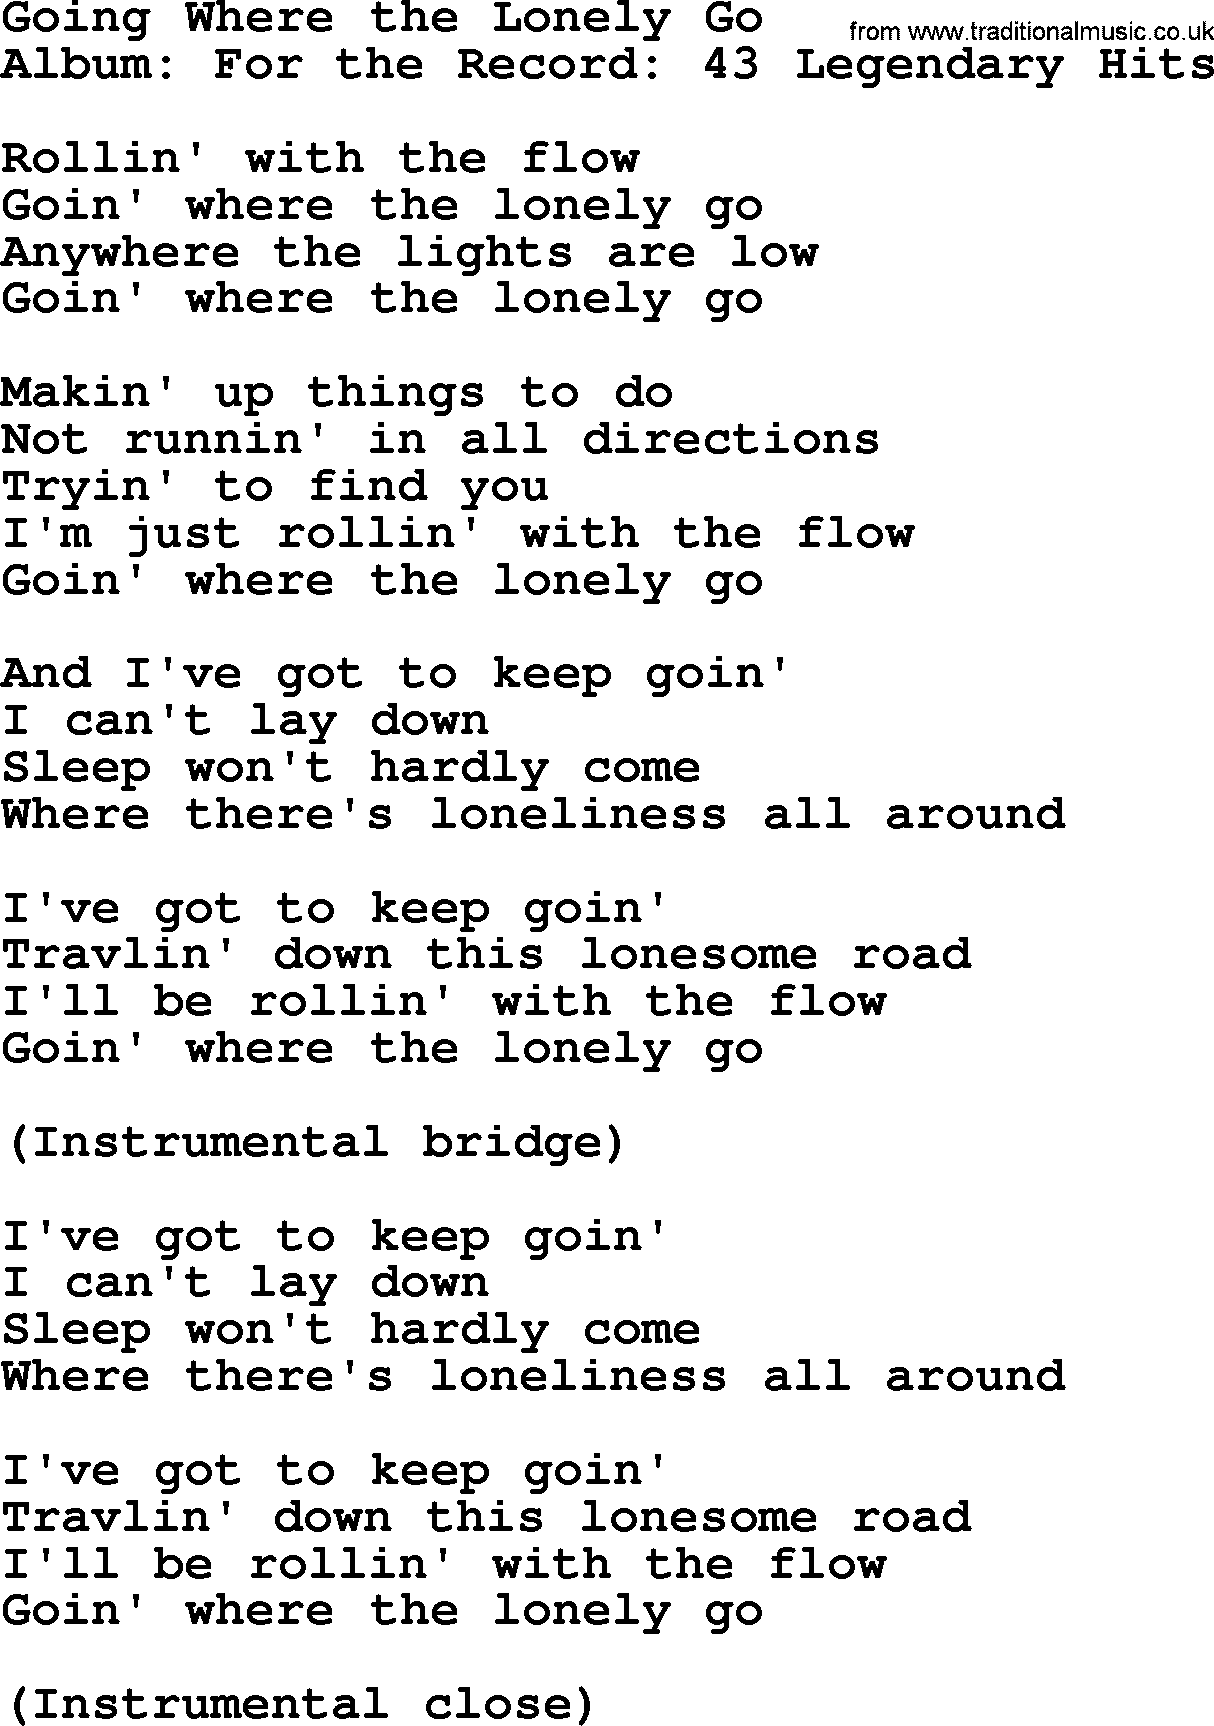 Merle Haggard song: Going Where The Lonely Go, lyrics.